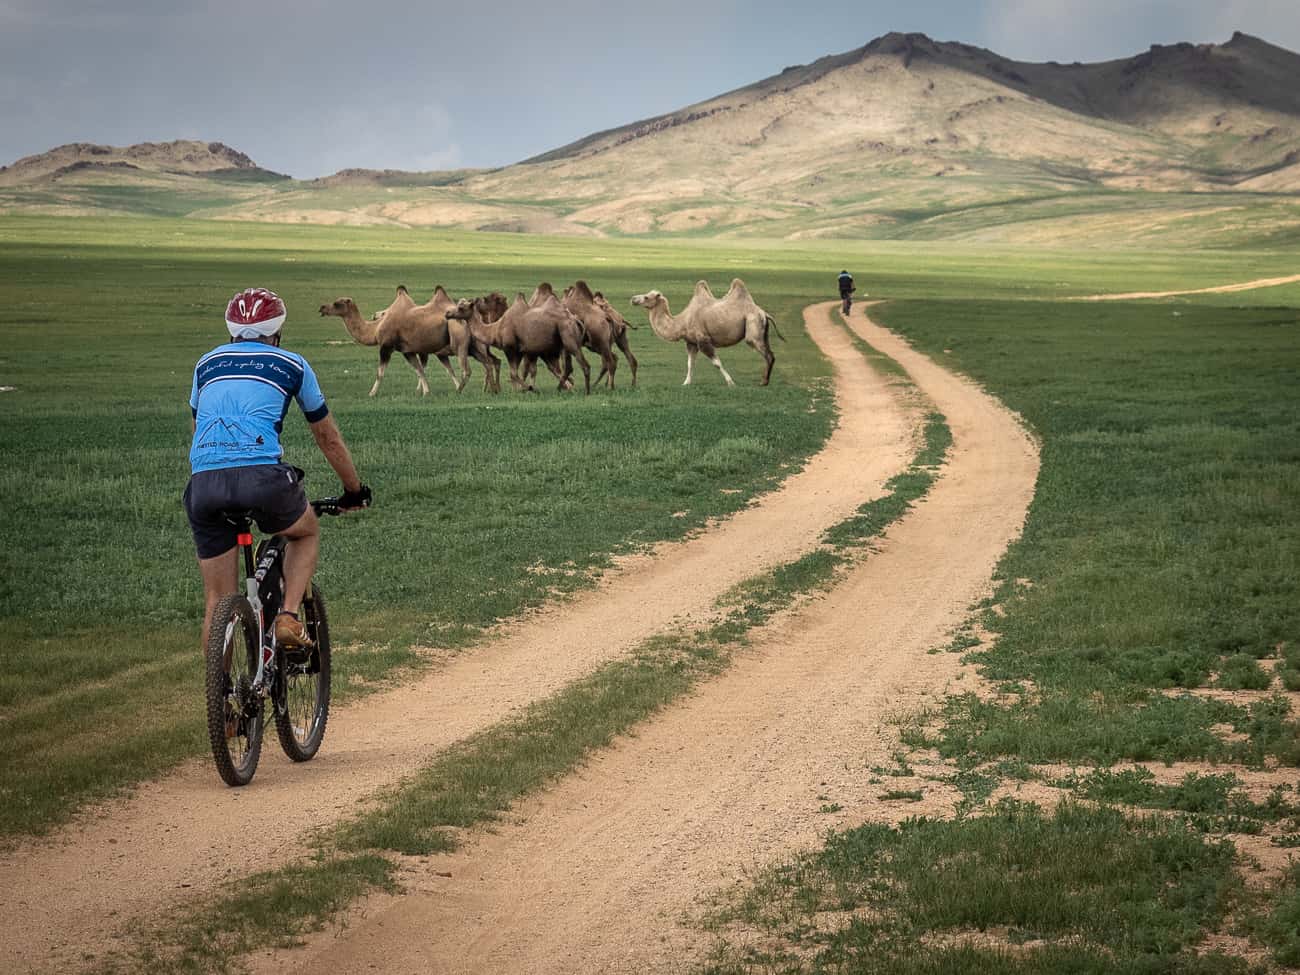 a cyclist on tour in Mongolia passing a herd of camels 